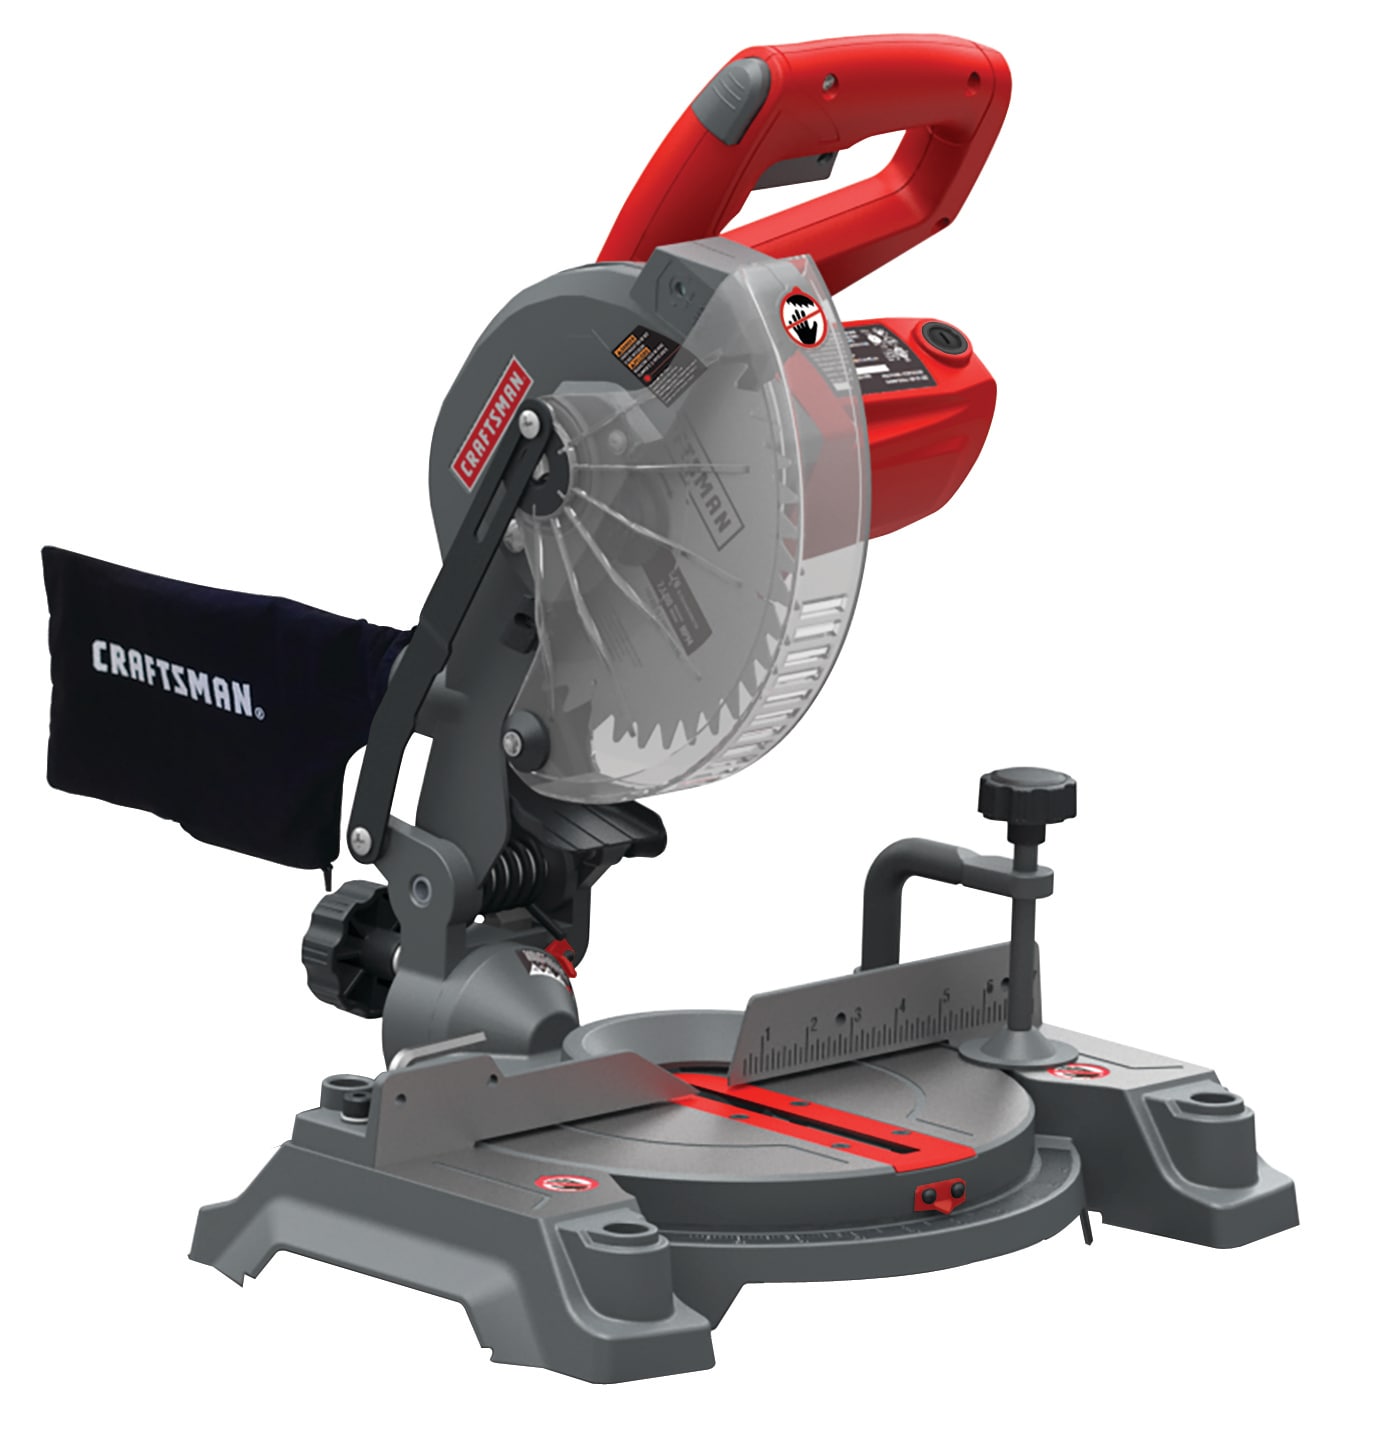 7-1/4-in 9-Amp Single Bevel Compound Corded Miter Saw | - CRAFTSMAN CMXEMAX69434509